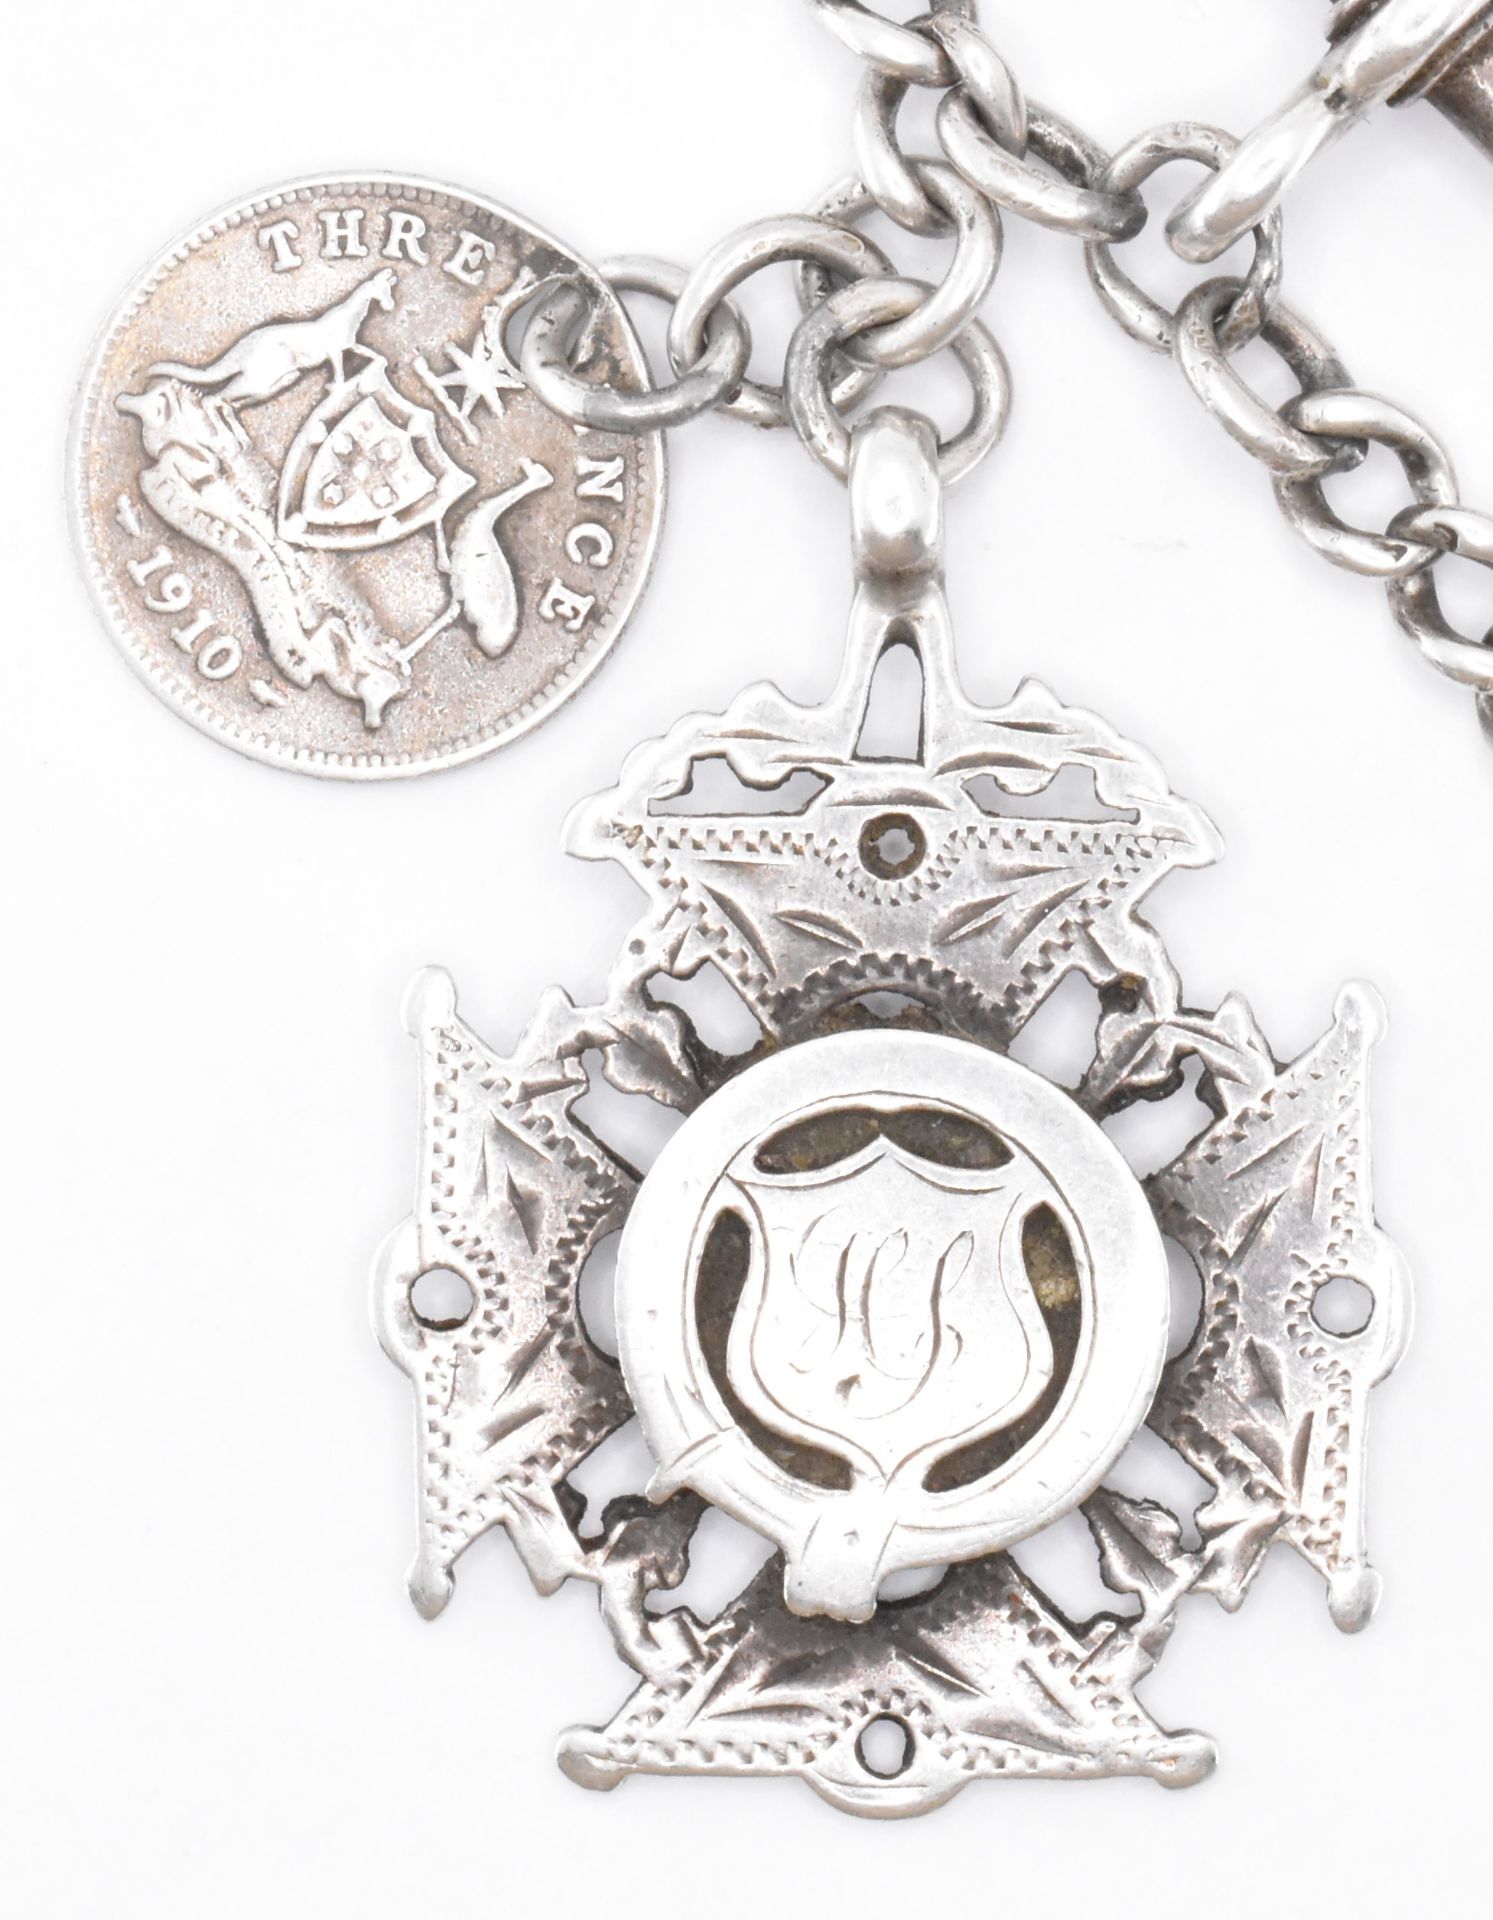 EDWARDIAN SILVER POCKET WATCH CHAIN WITH VESTA & MEDAL - Image 3 of 12